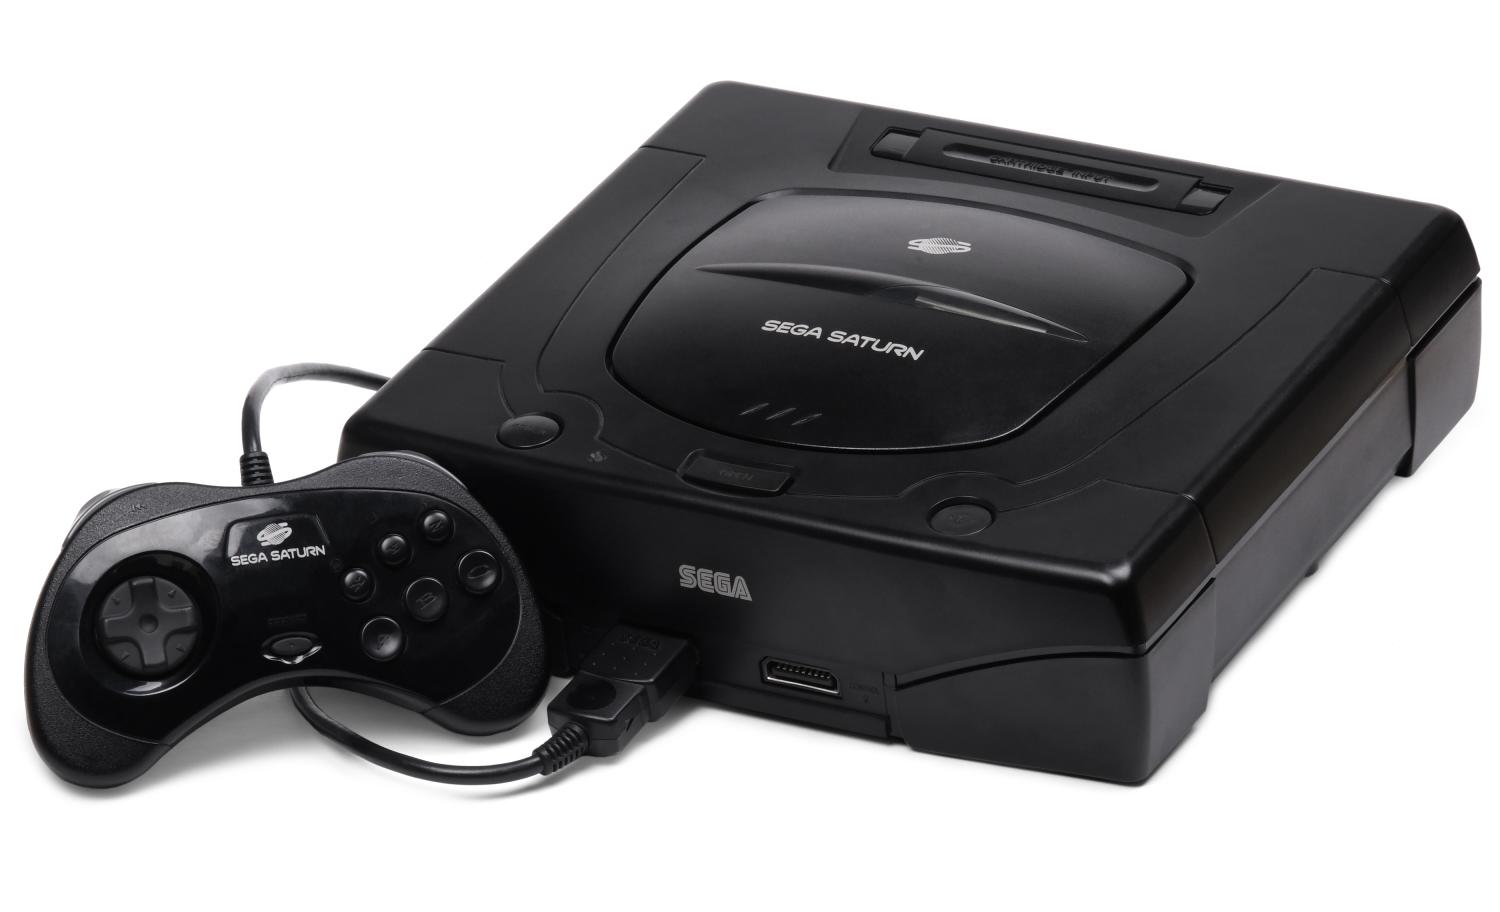 The Sega Saturn home console and controller.